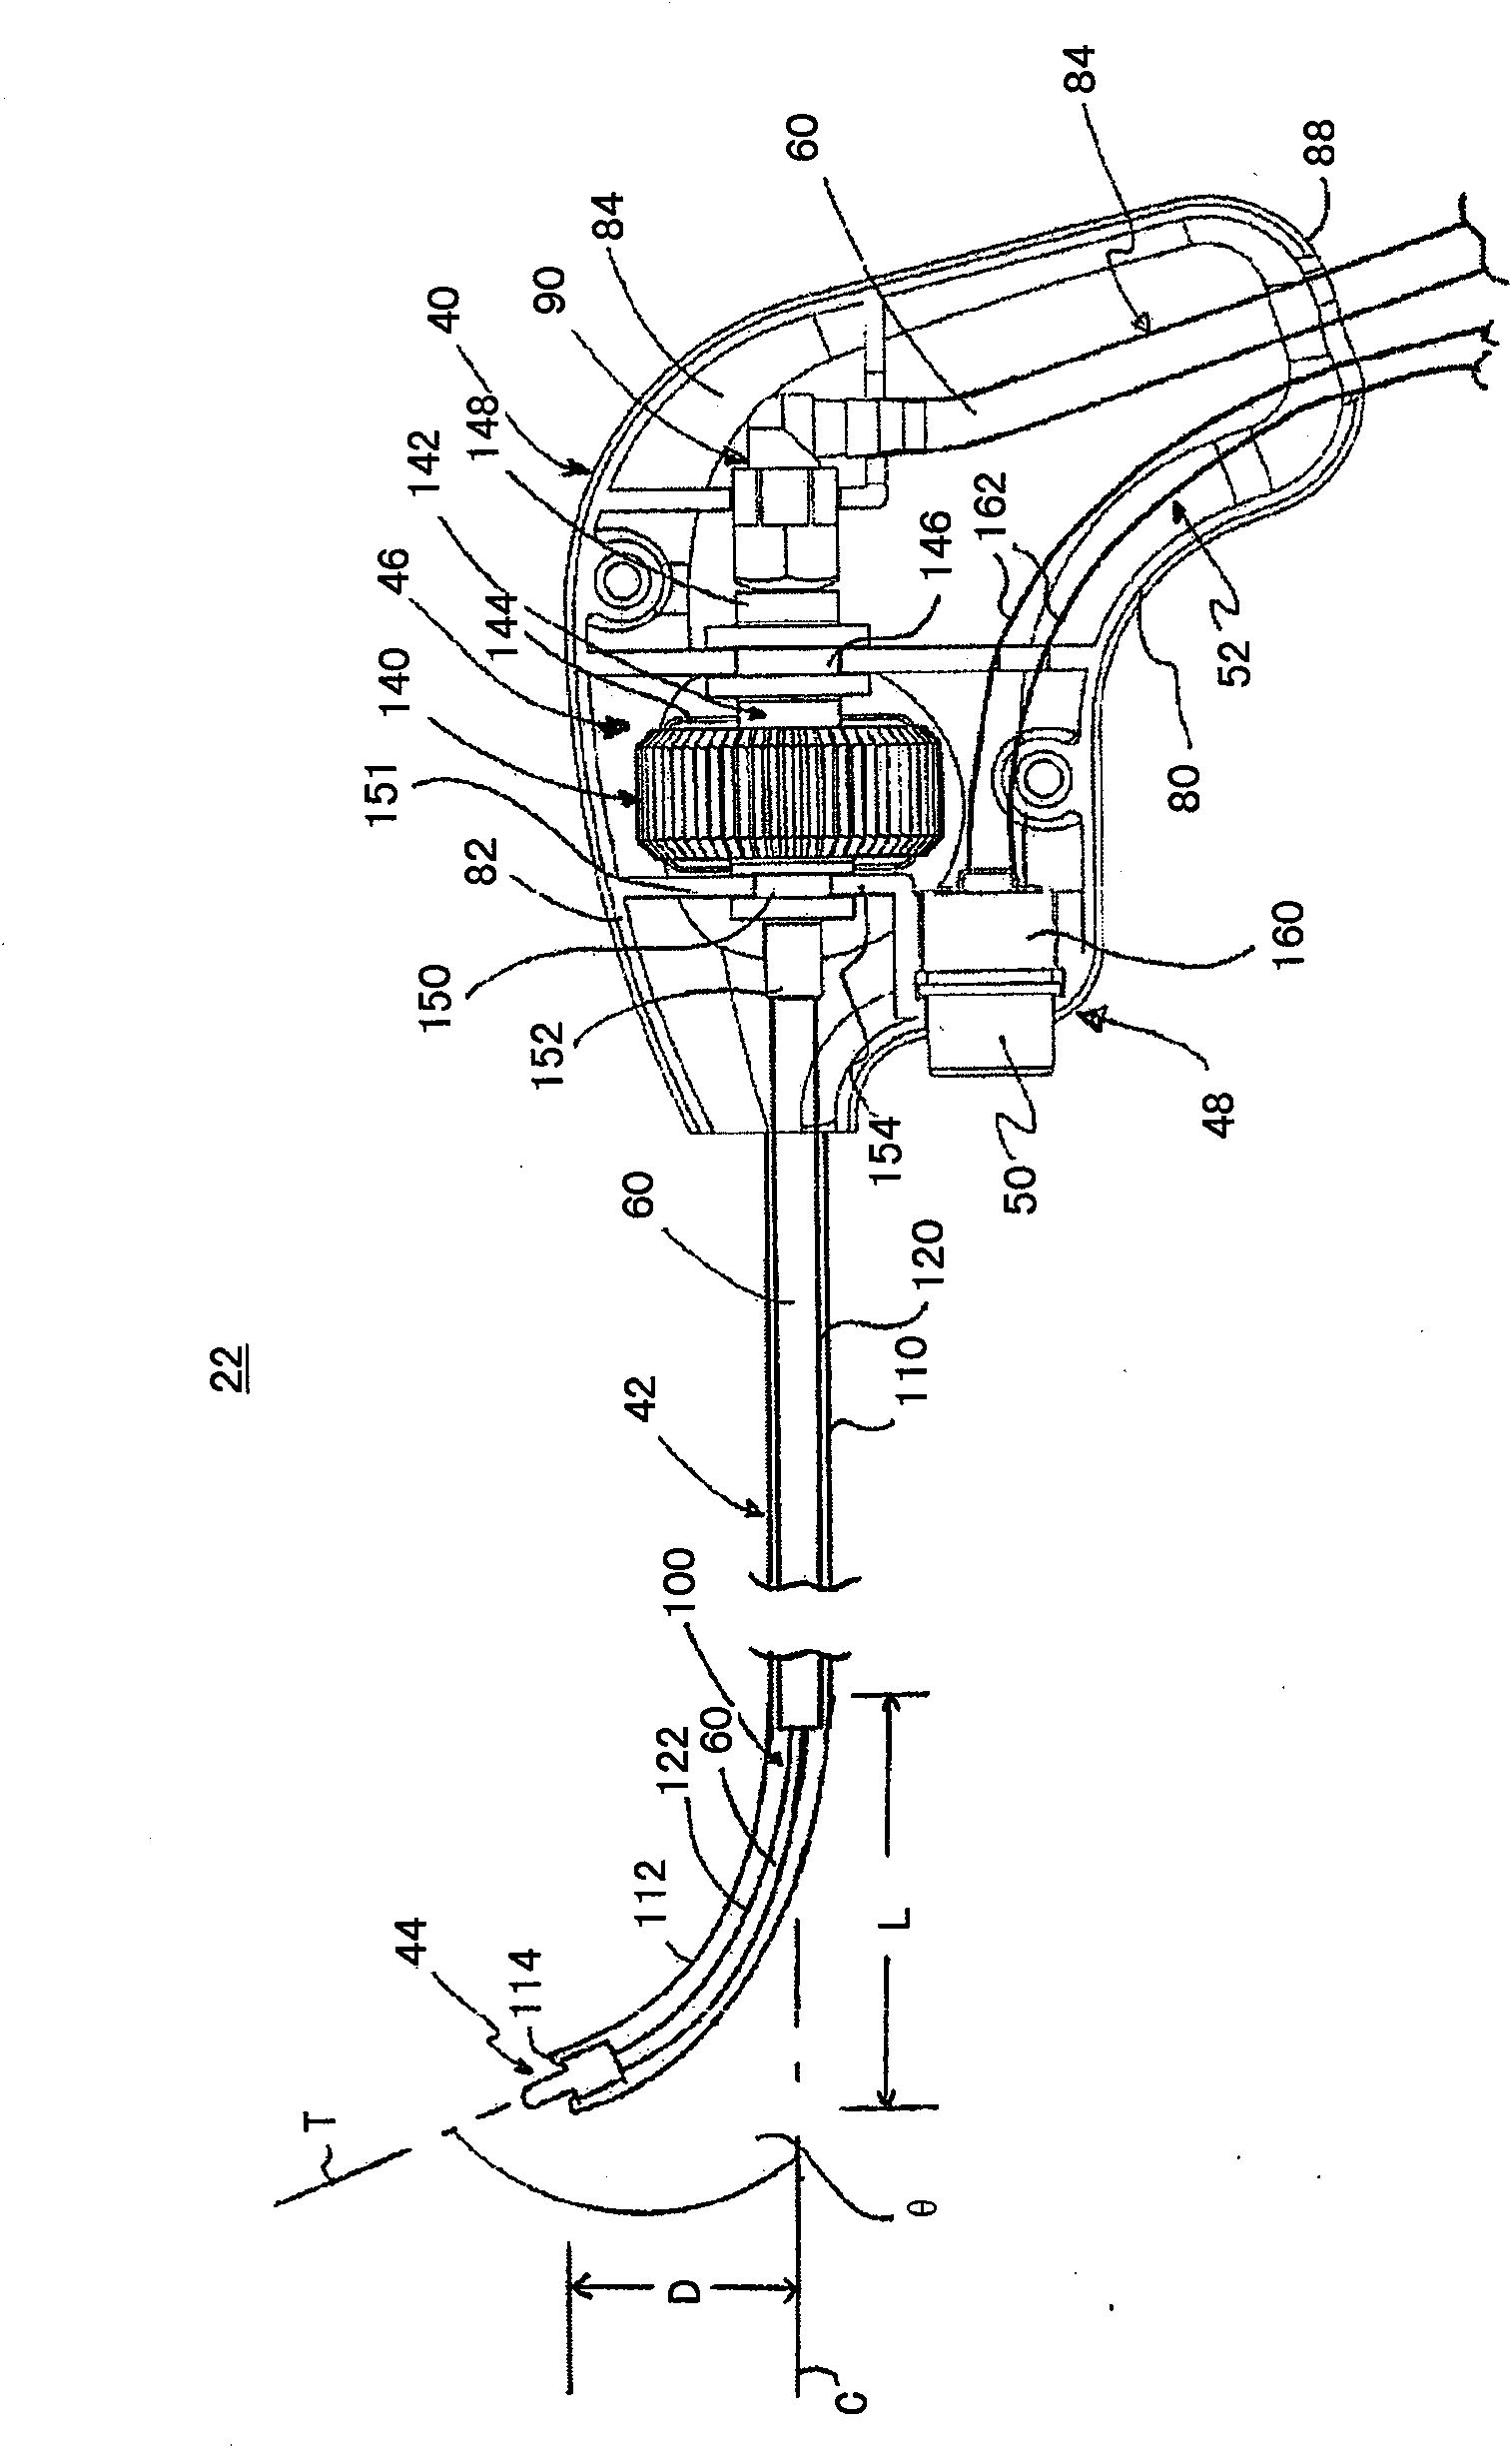 Surgical instrument, system, and method for frontal sinus irrigation